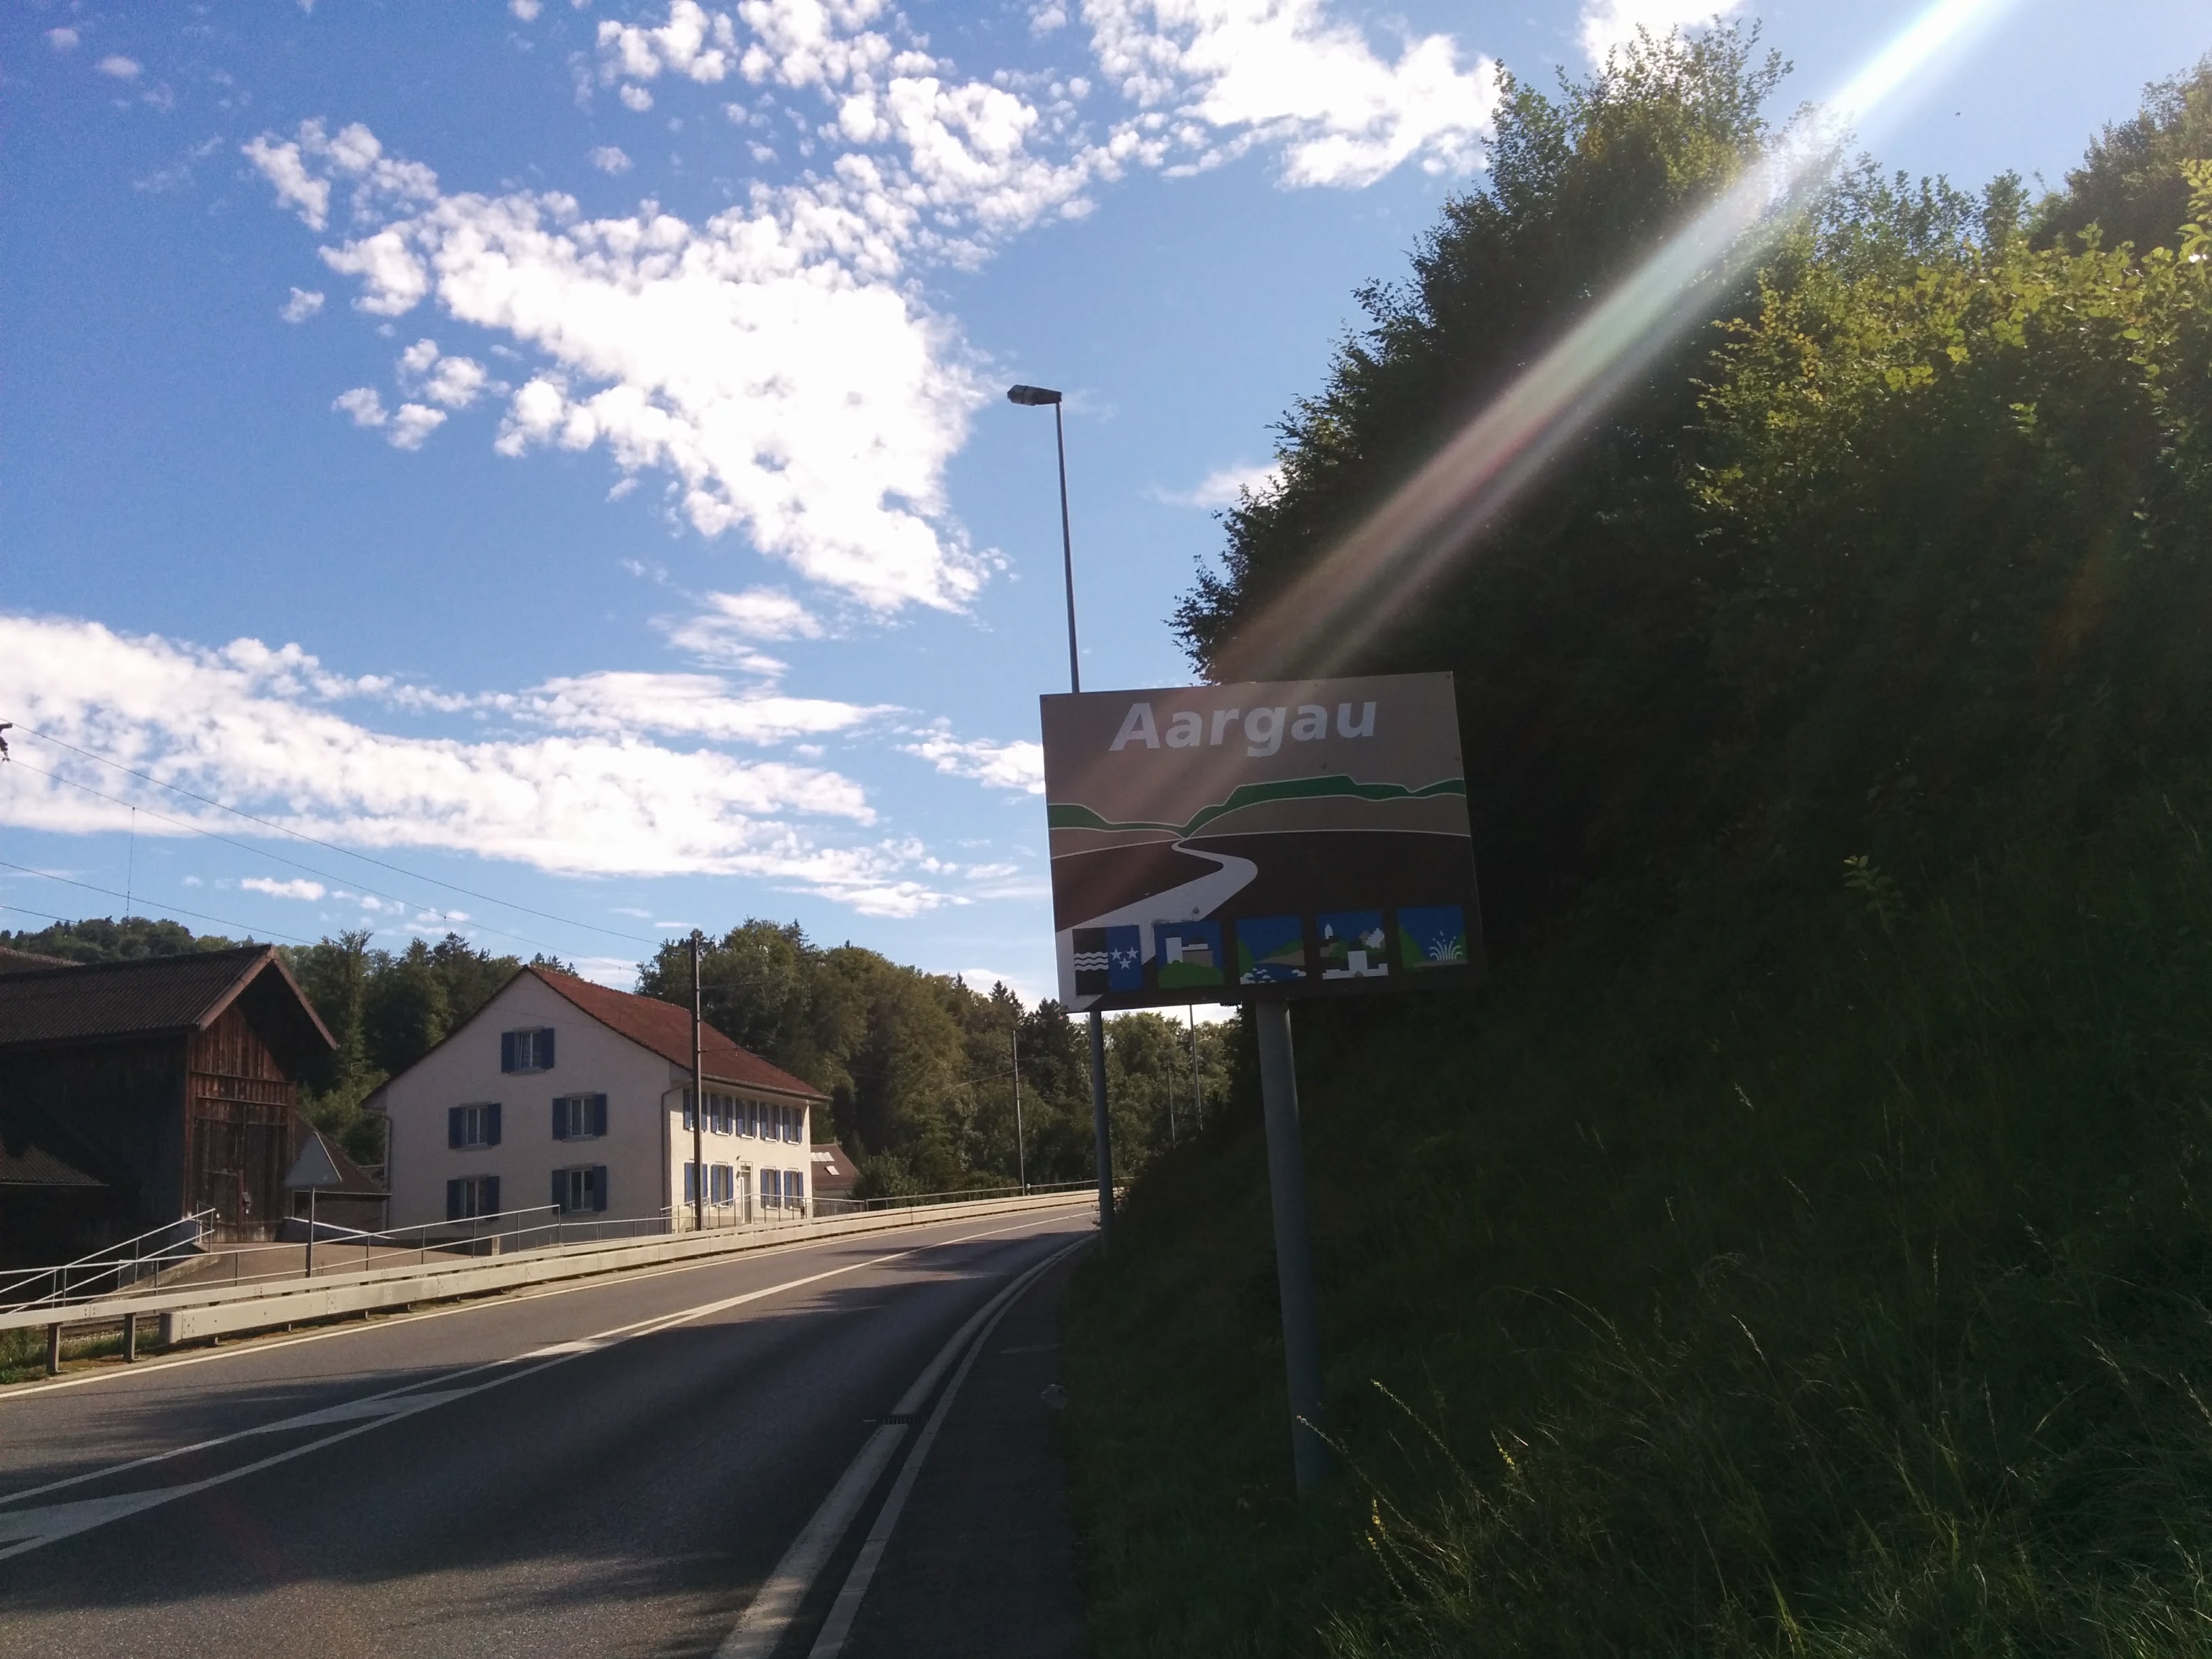 Entering Aargau. It was my first time biking to another Canton!